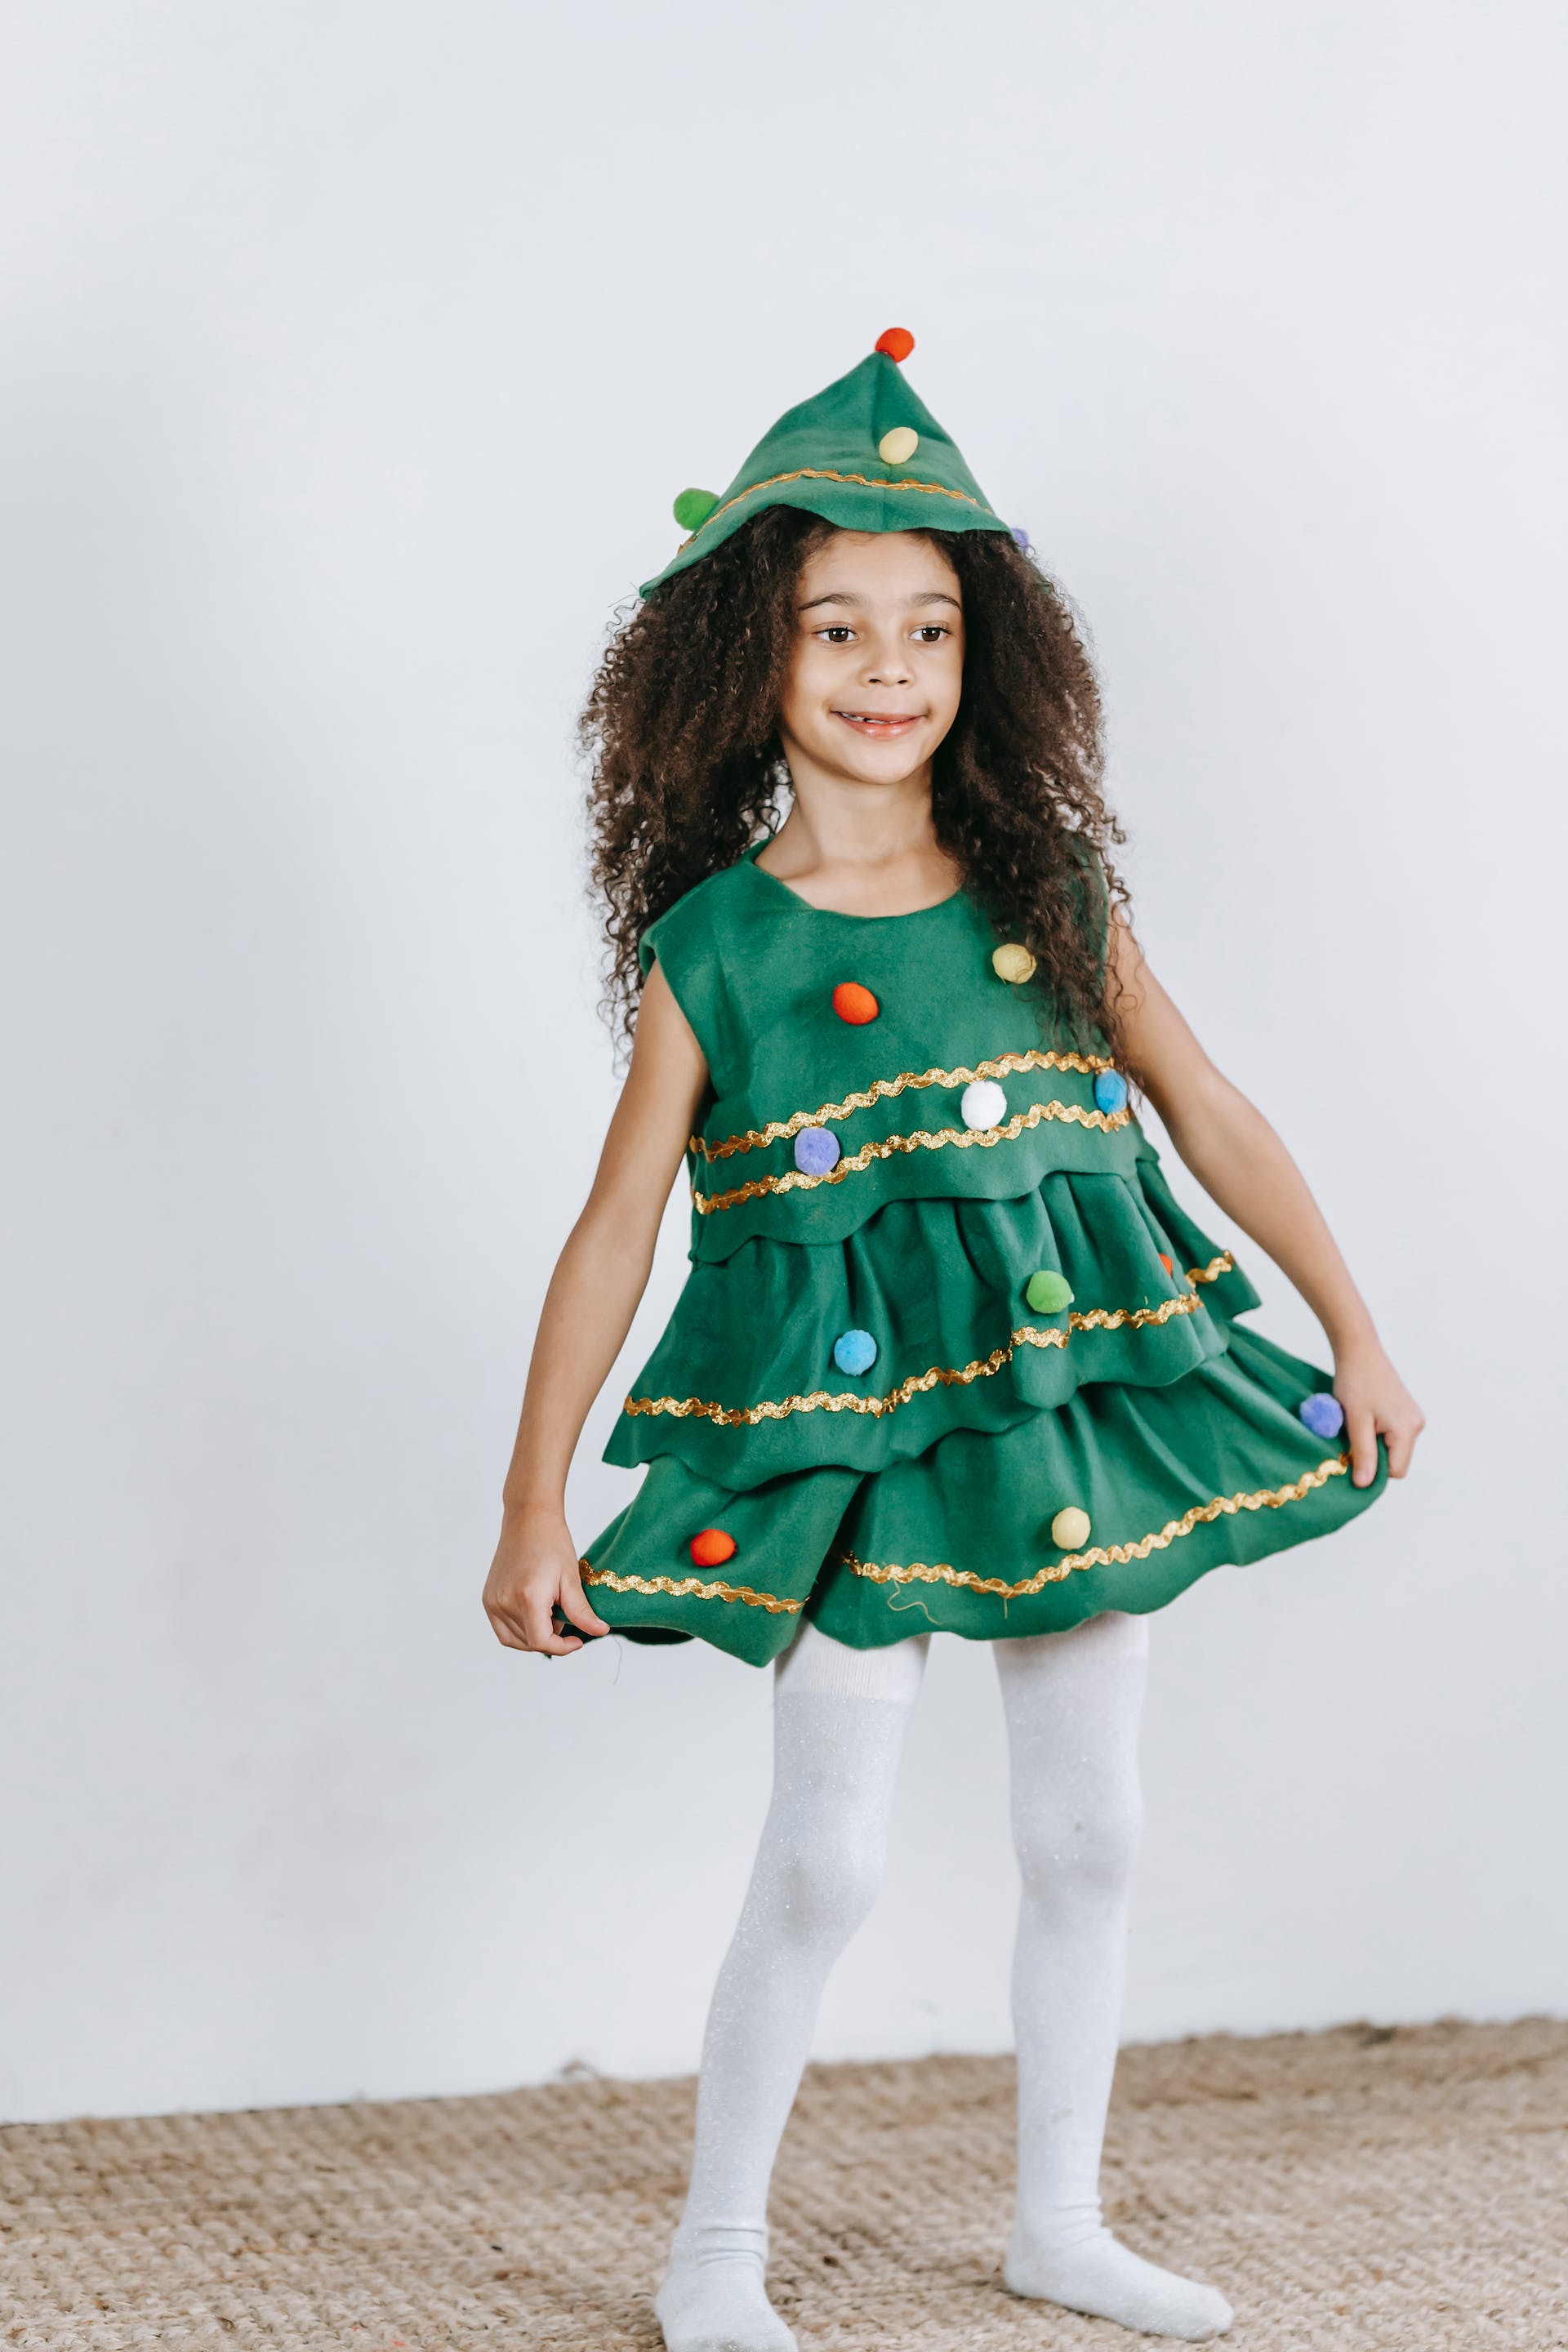 A little girl wearing a Christmas tree costume | Source: Pexels